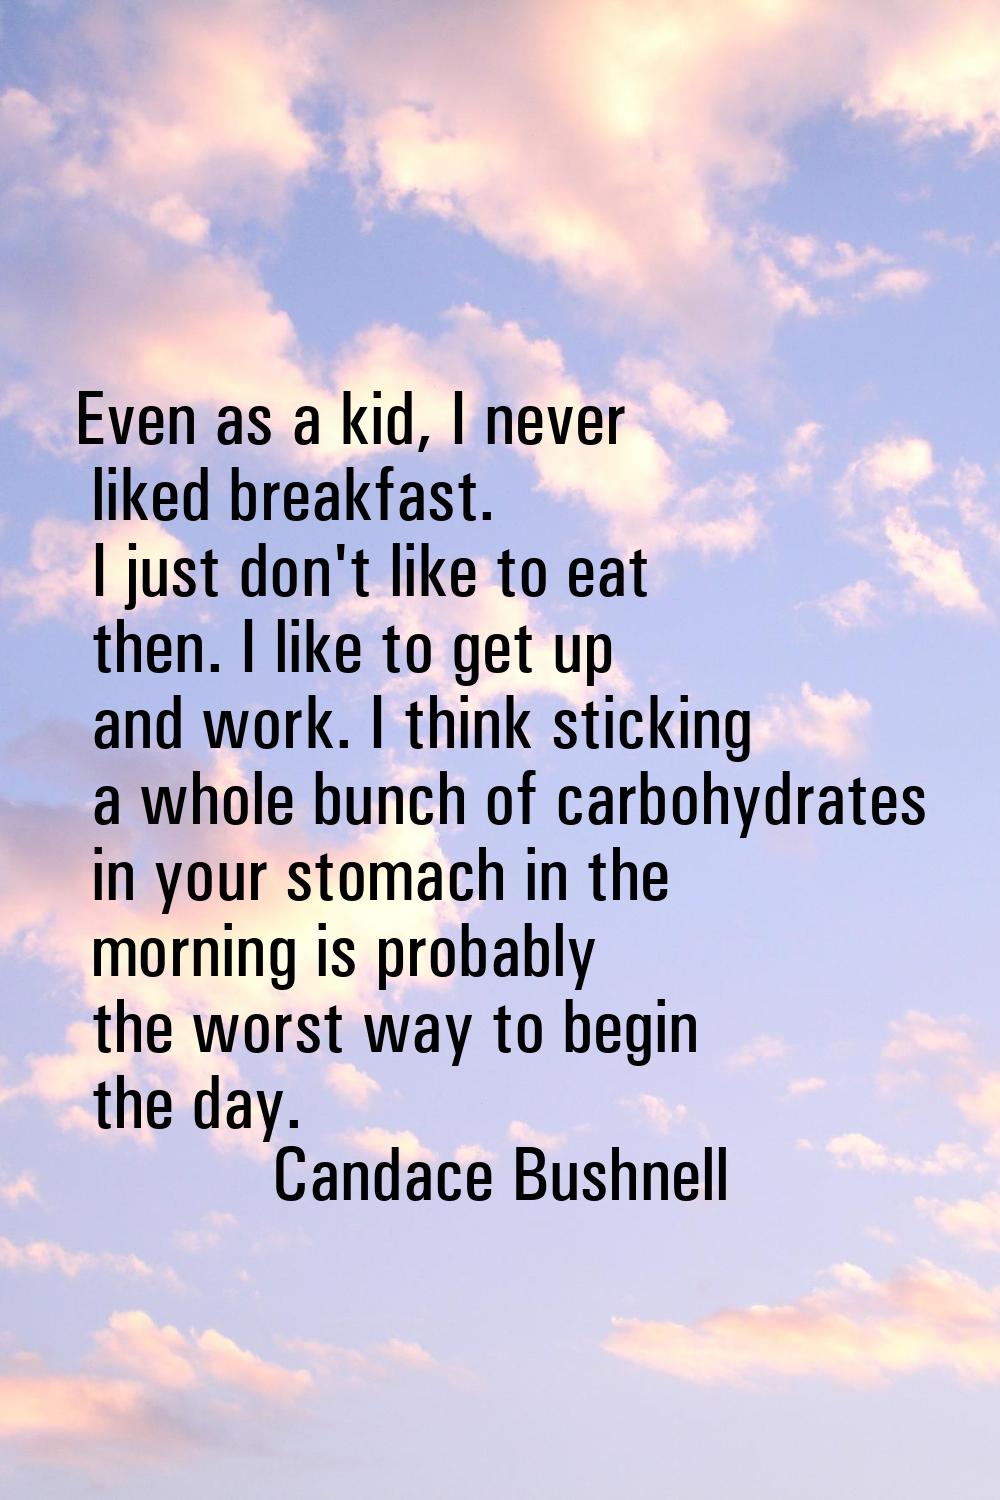 Even as a kid, I never liked breakfast. I just don't like to eat then. I like to get up and work. I